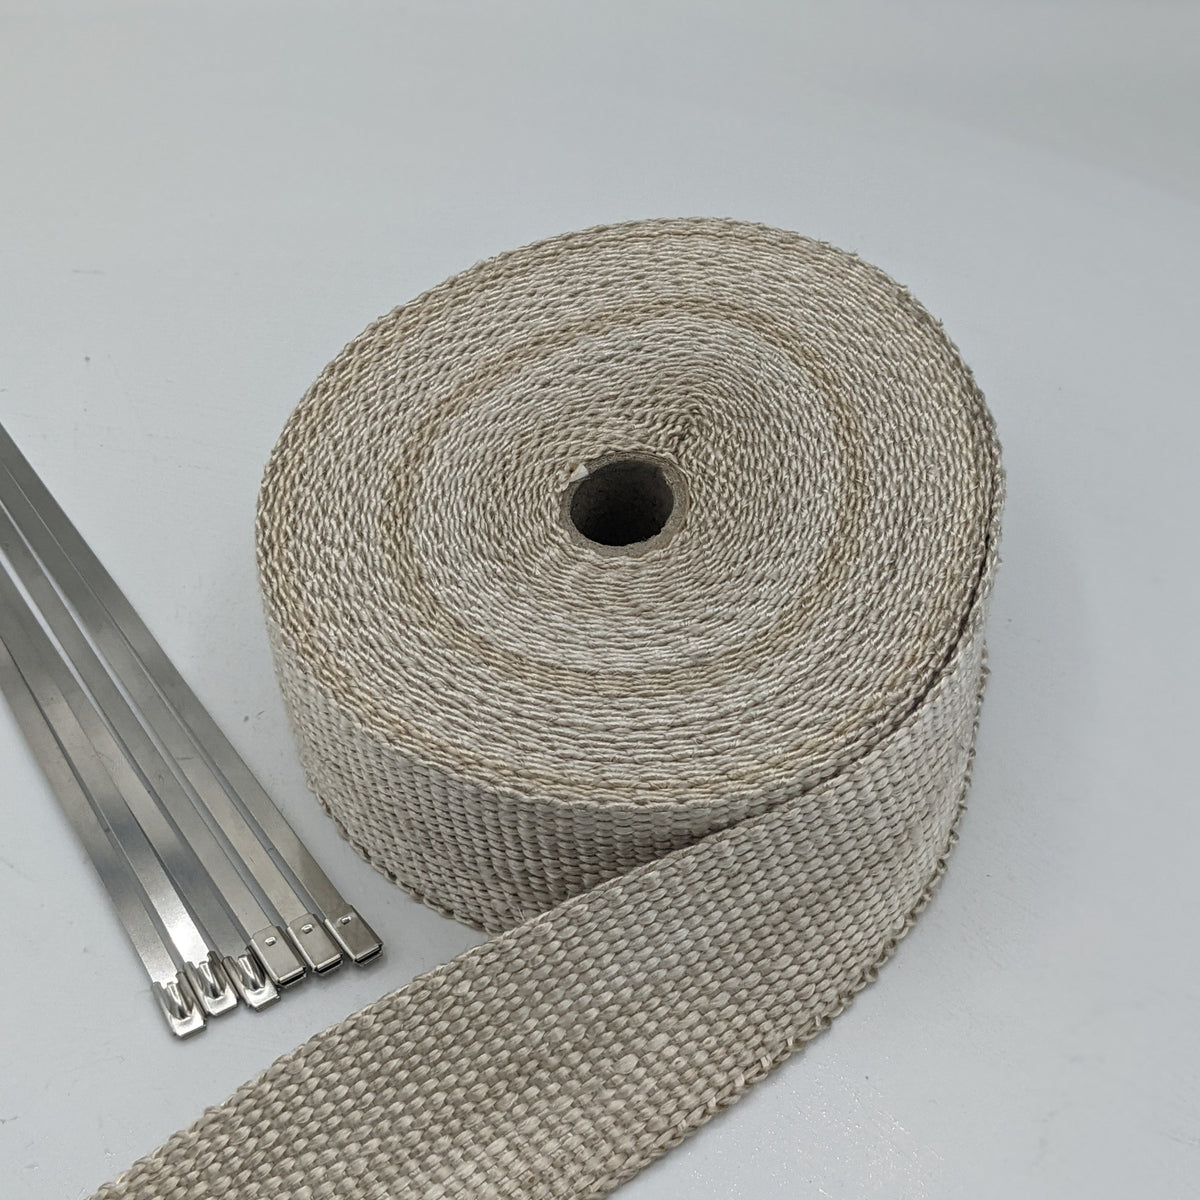 Exhaust Heat Wrap 10m x 50mm Roll Titanium Exhaust Heat Pipe Wrap Motorbike Pipe Header Heat Wrap Kit with 10 Stainless Ties 